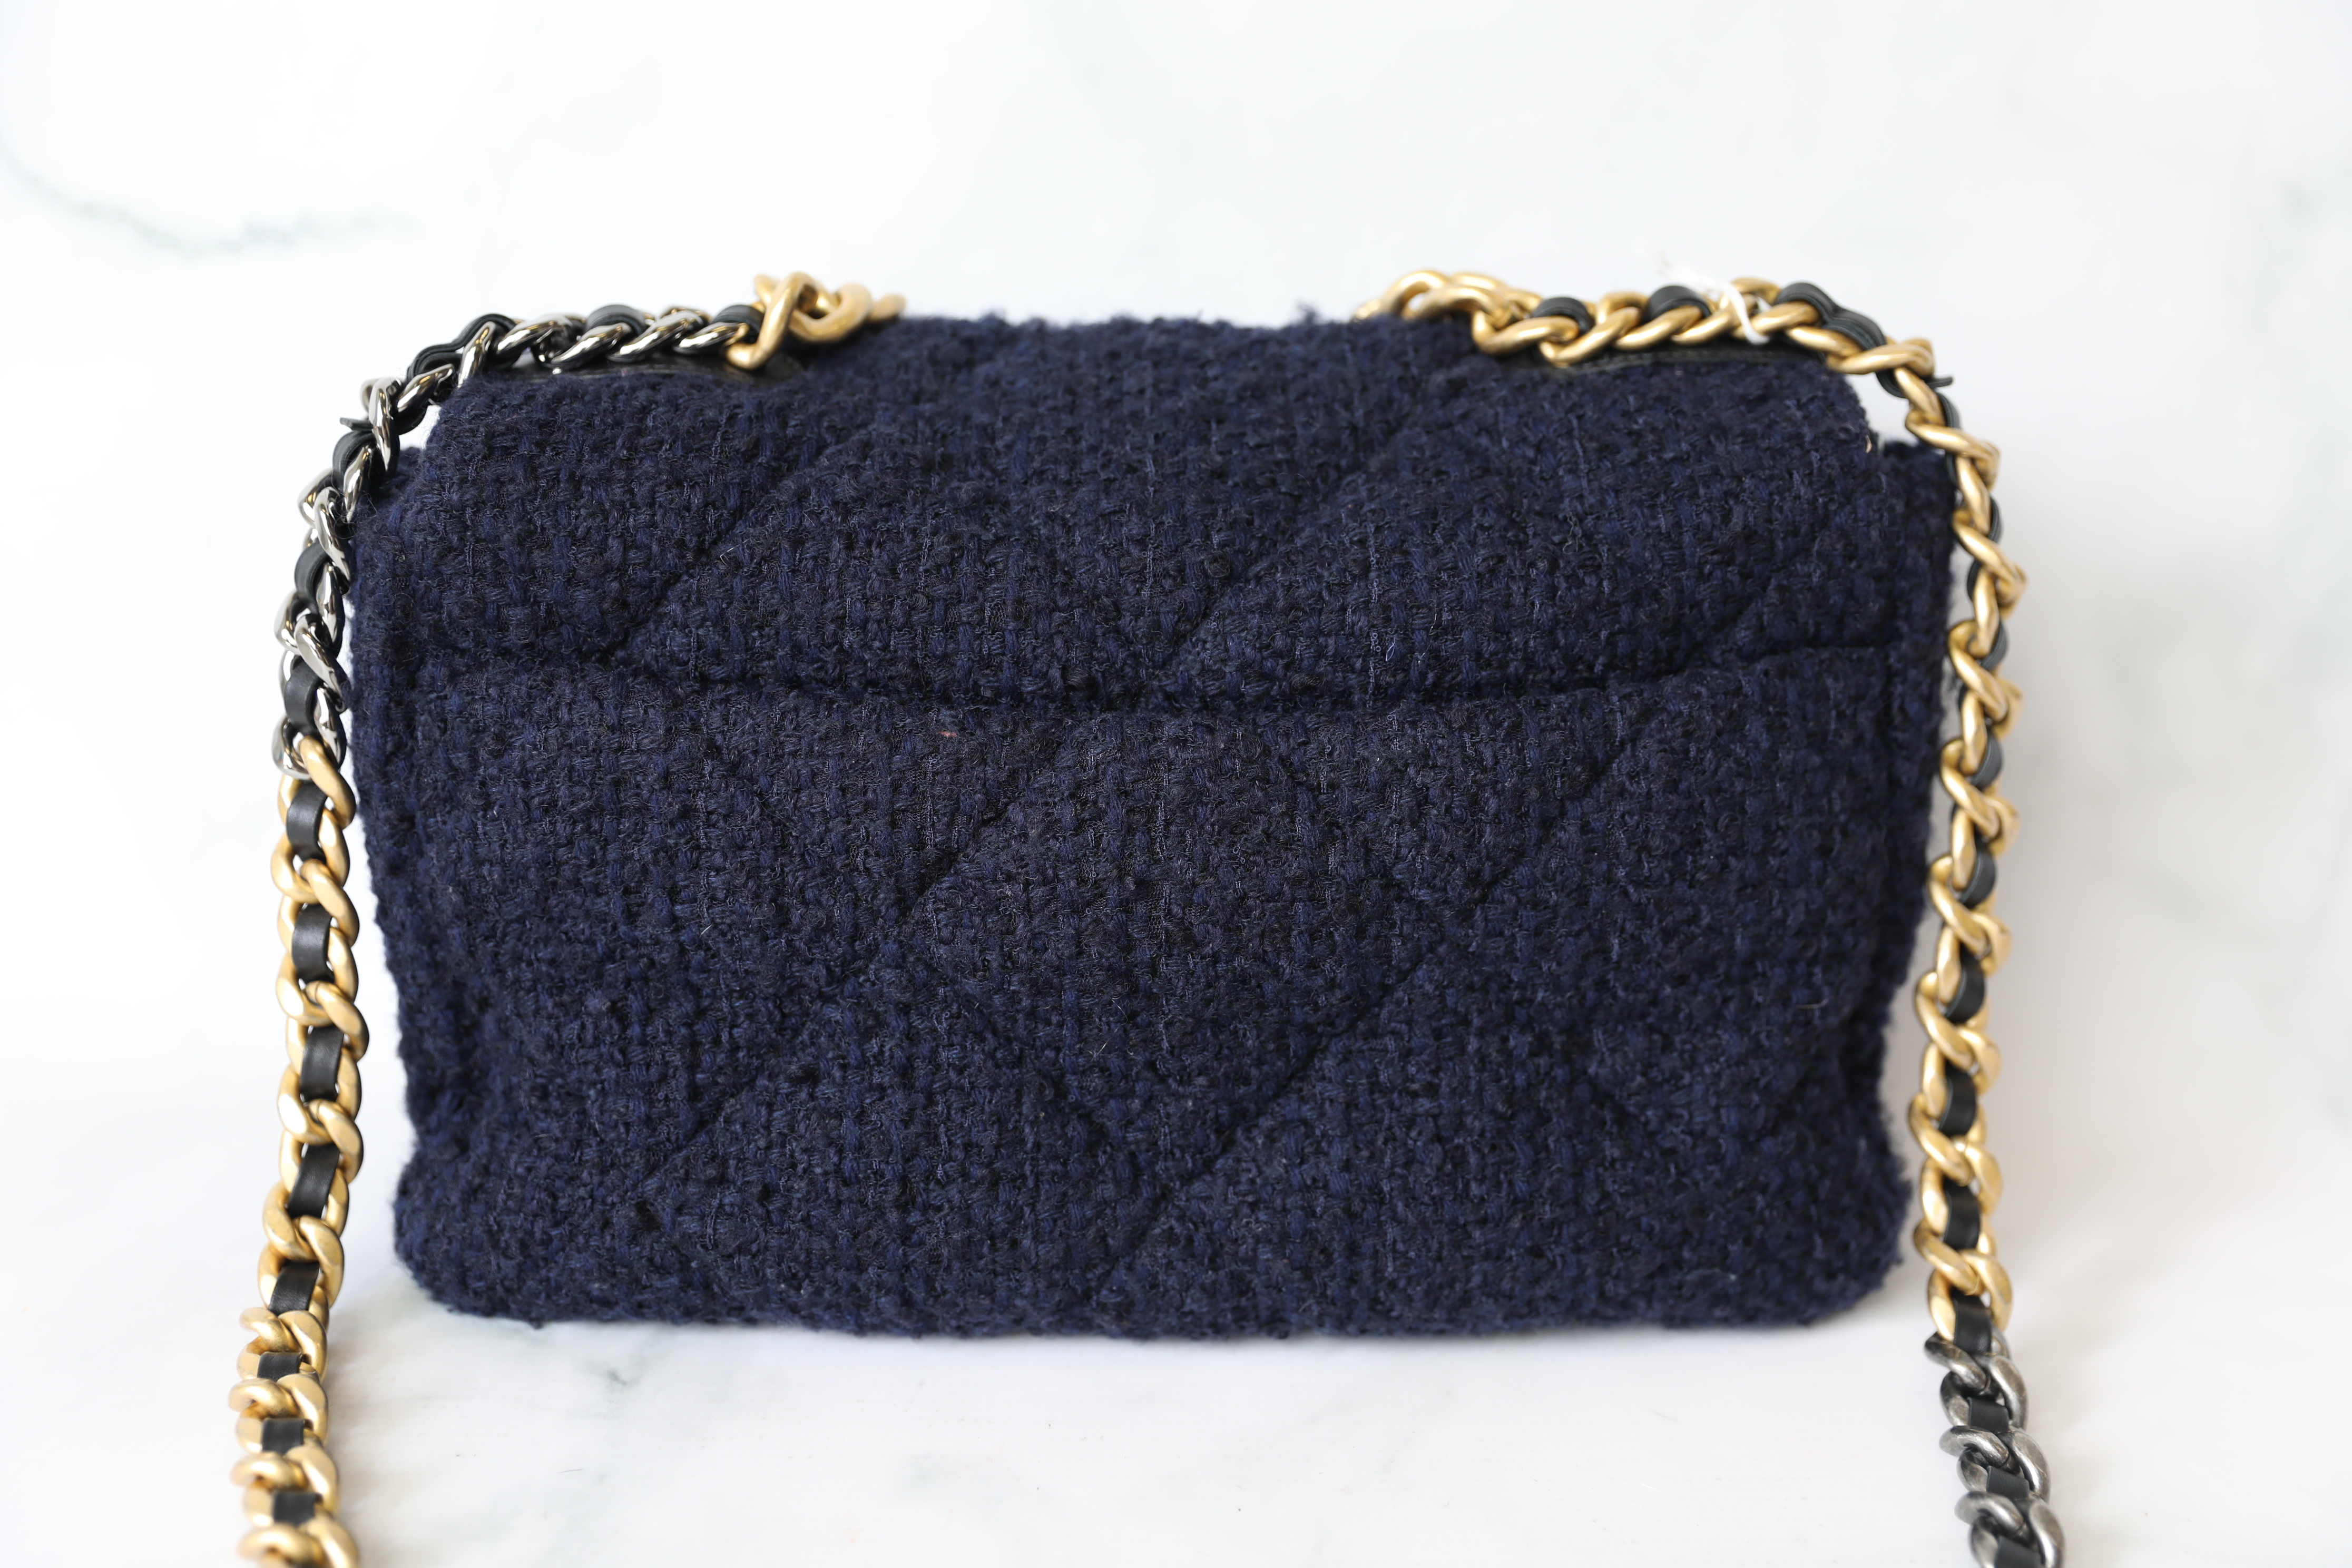 Chanel 19 Large, Navy Tweed, Preowned in Dustbag WA001 - Julia Rose Boston